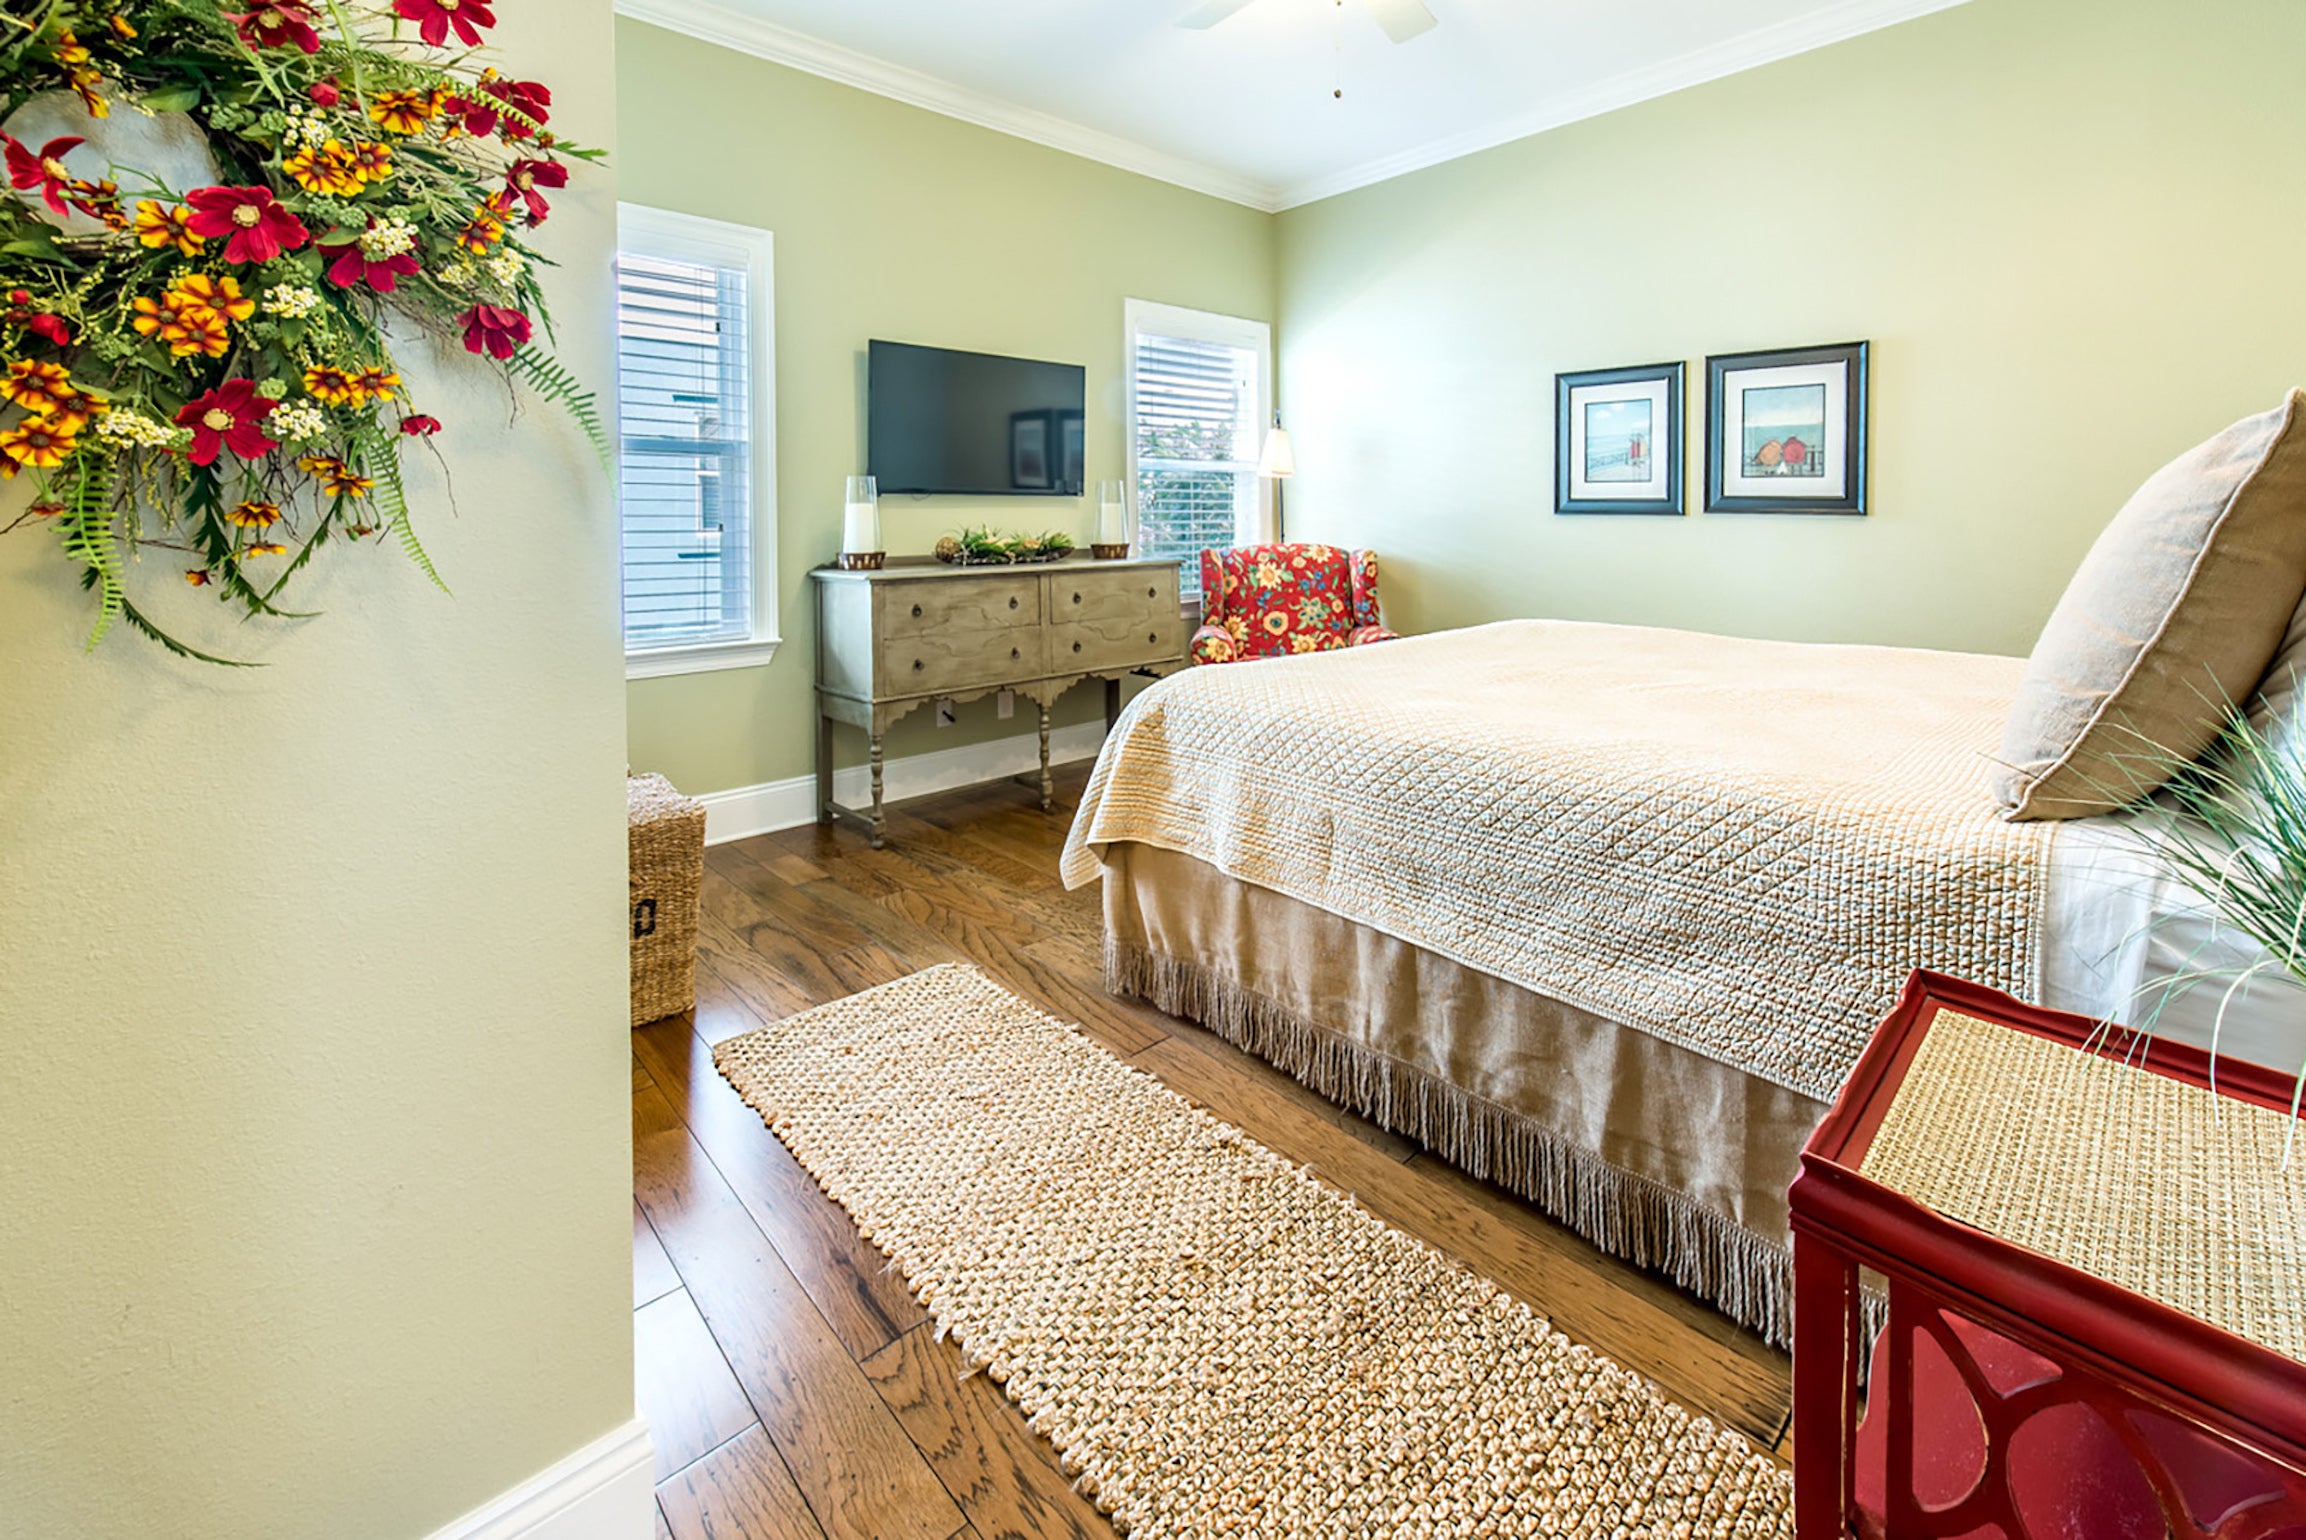 What a beautiful relaxing 1st flr Master bedroom!